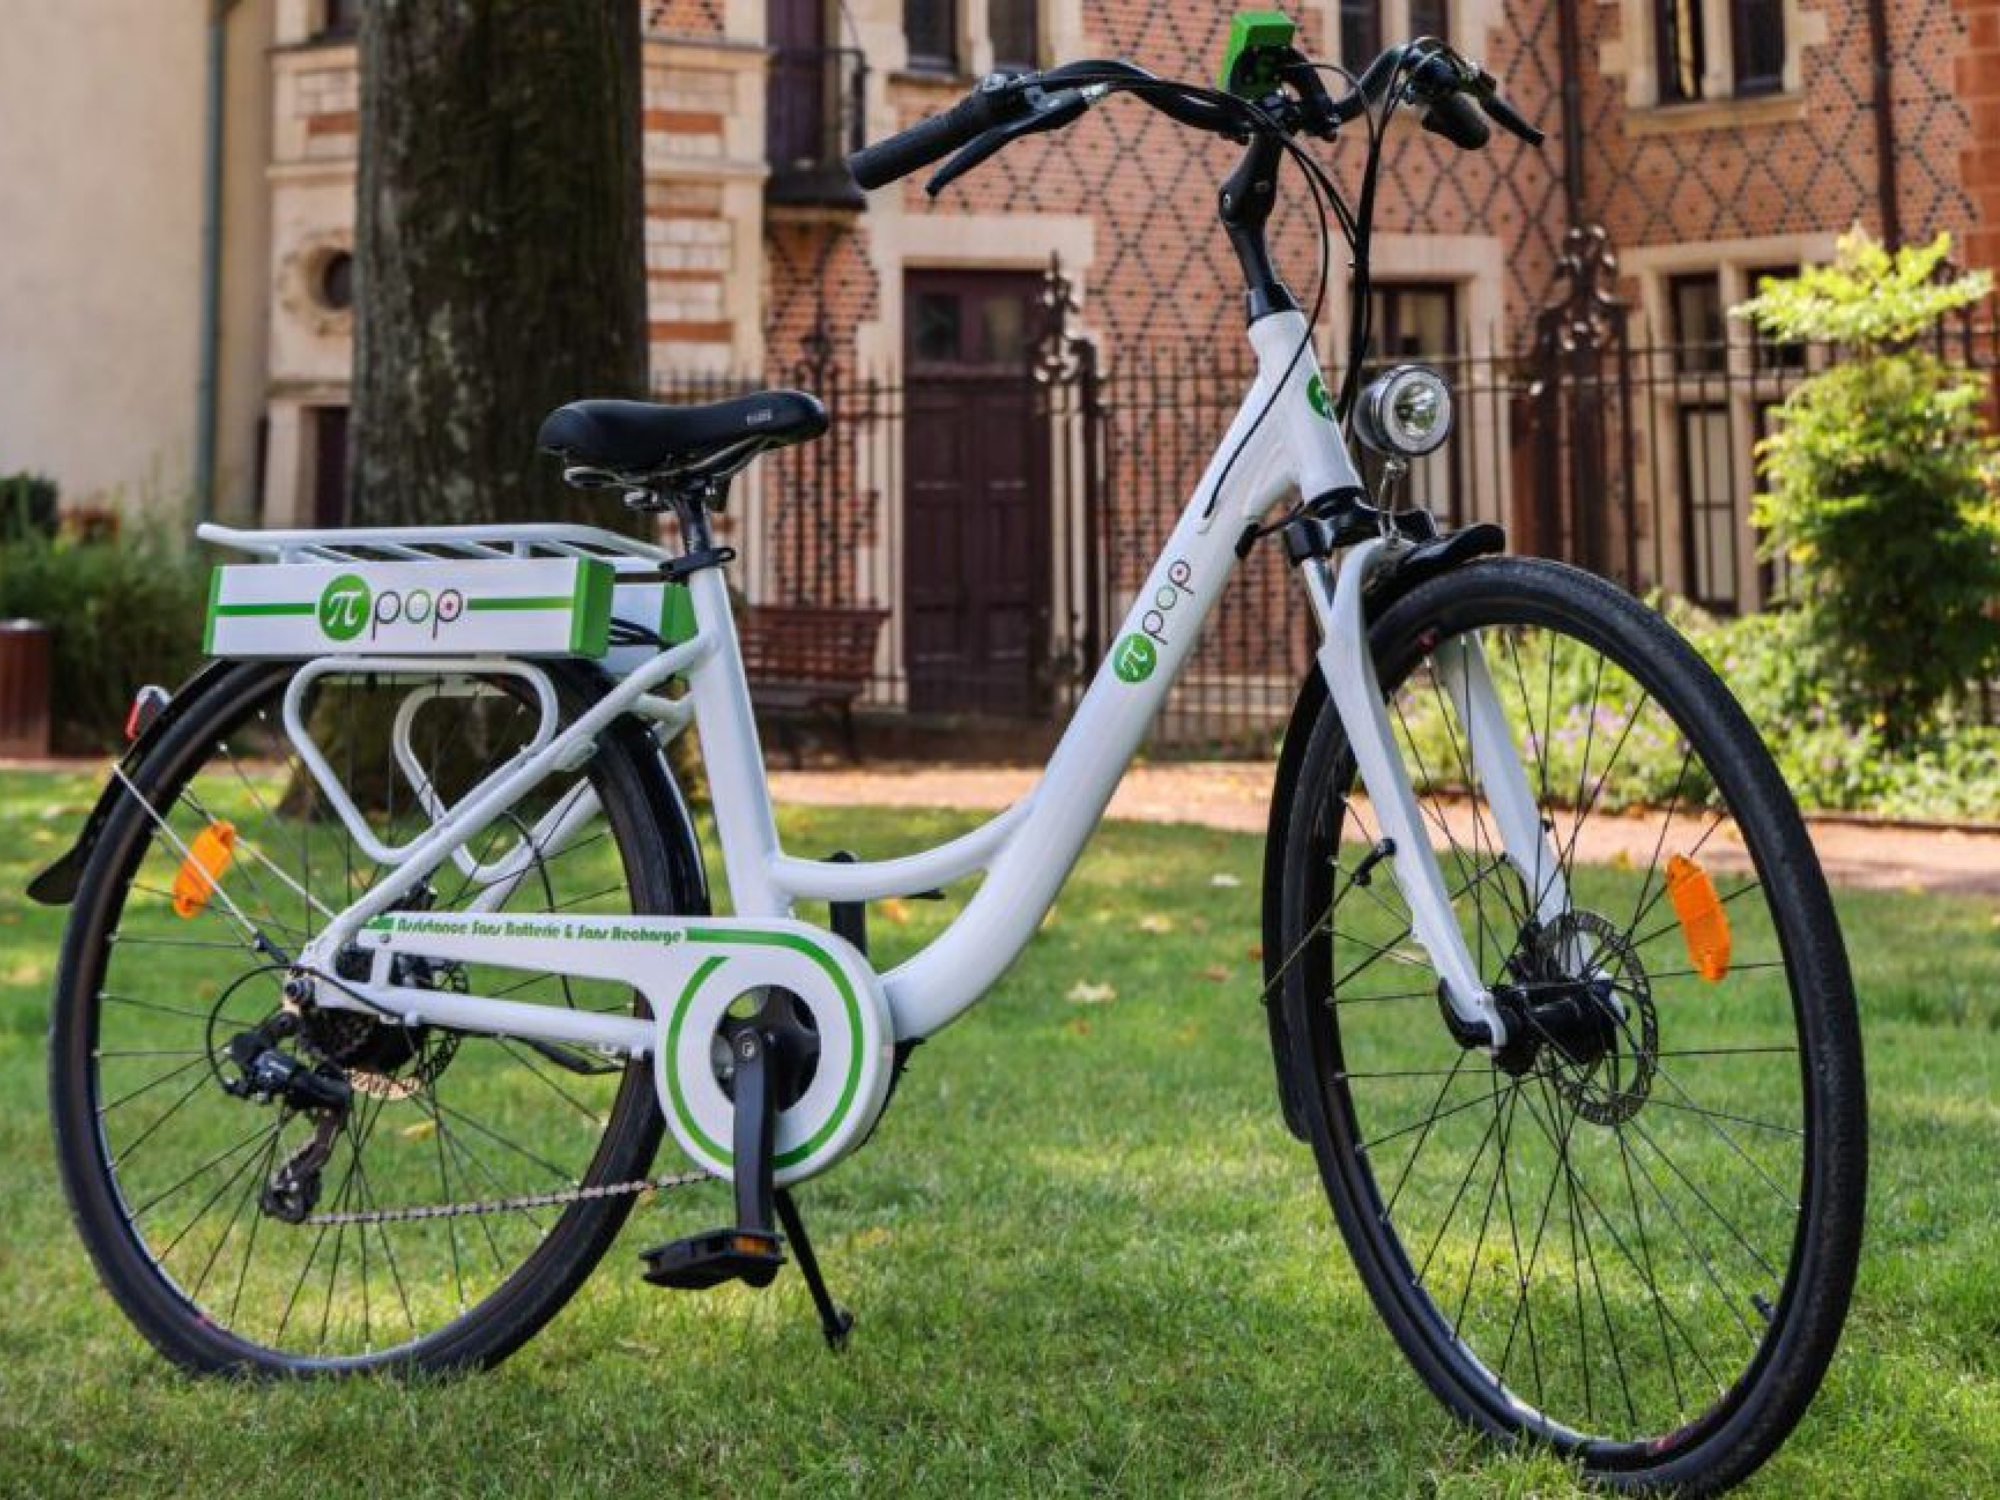 Insulated Electric Scooter, Camping Vehicle, Outdoor Bicycle